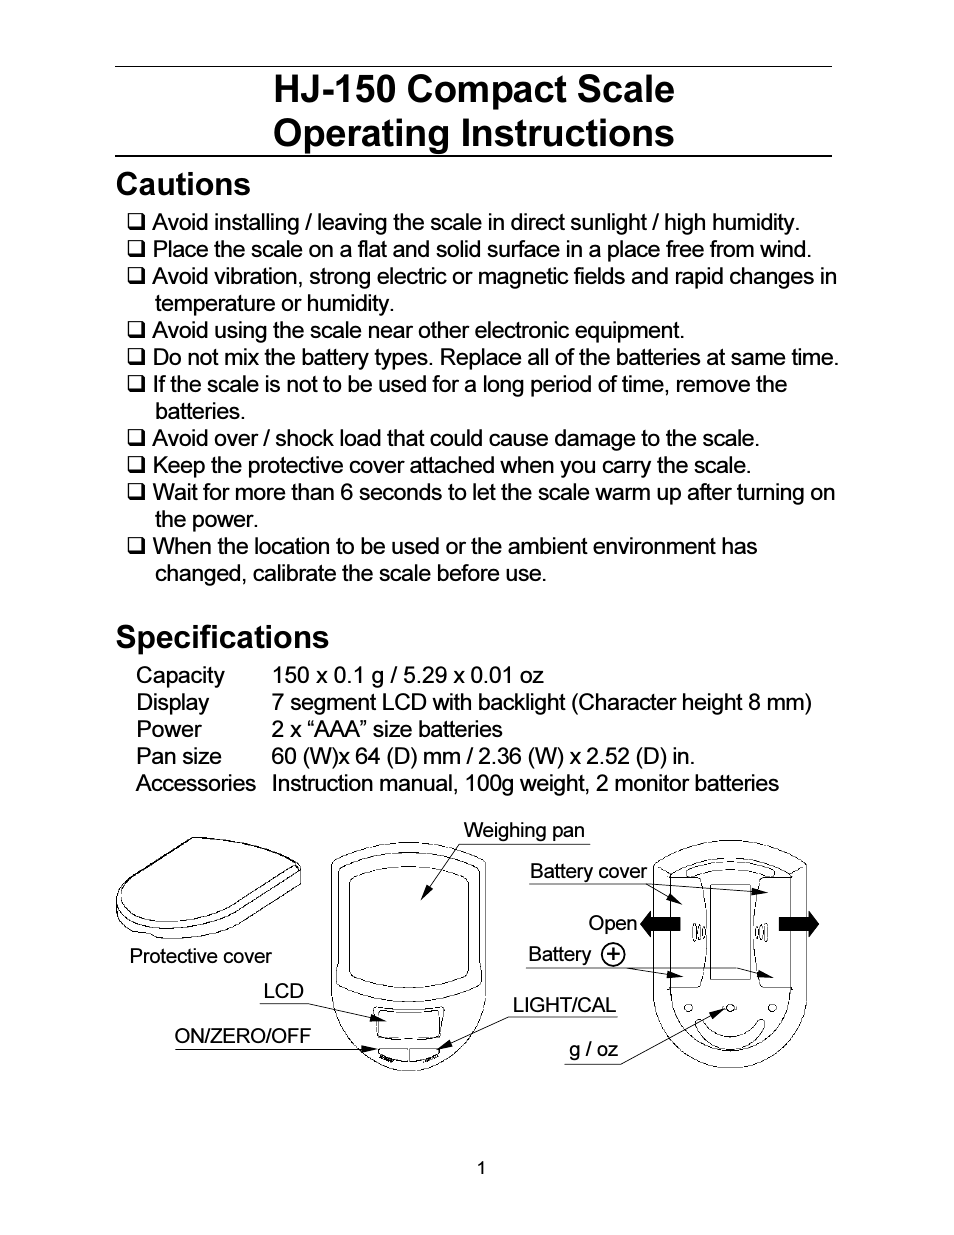 Compact Scale HJ-150 (Page 1)